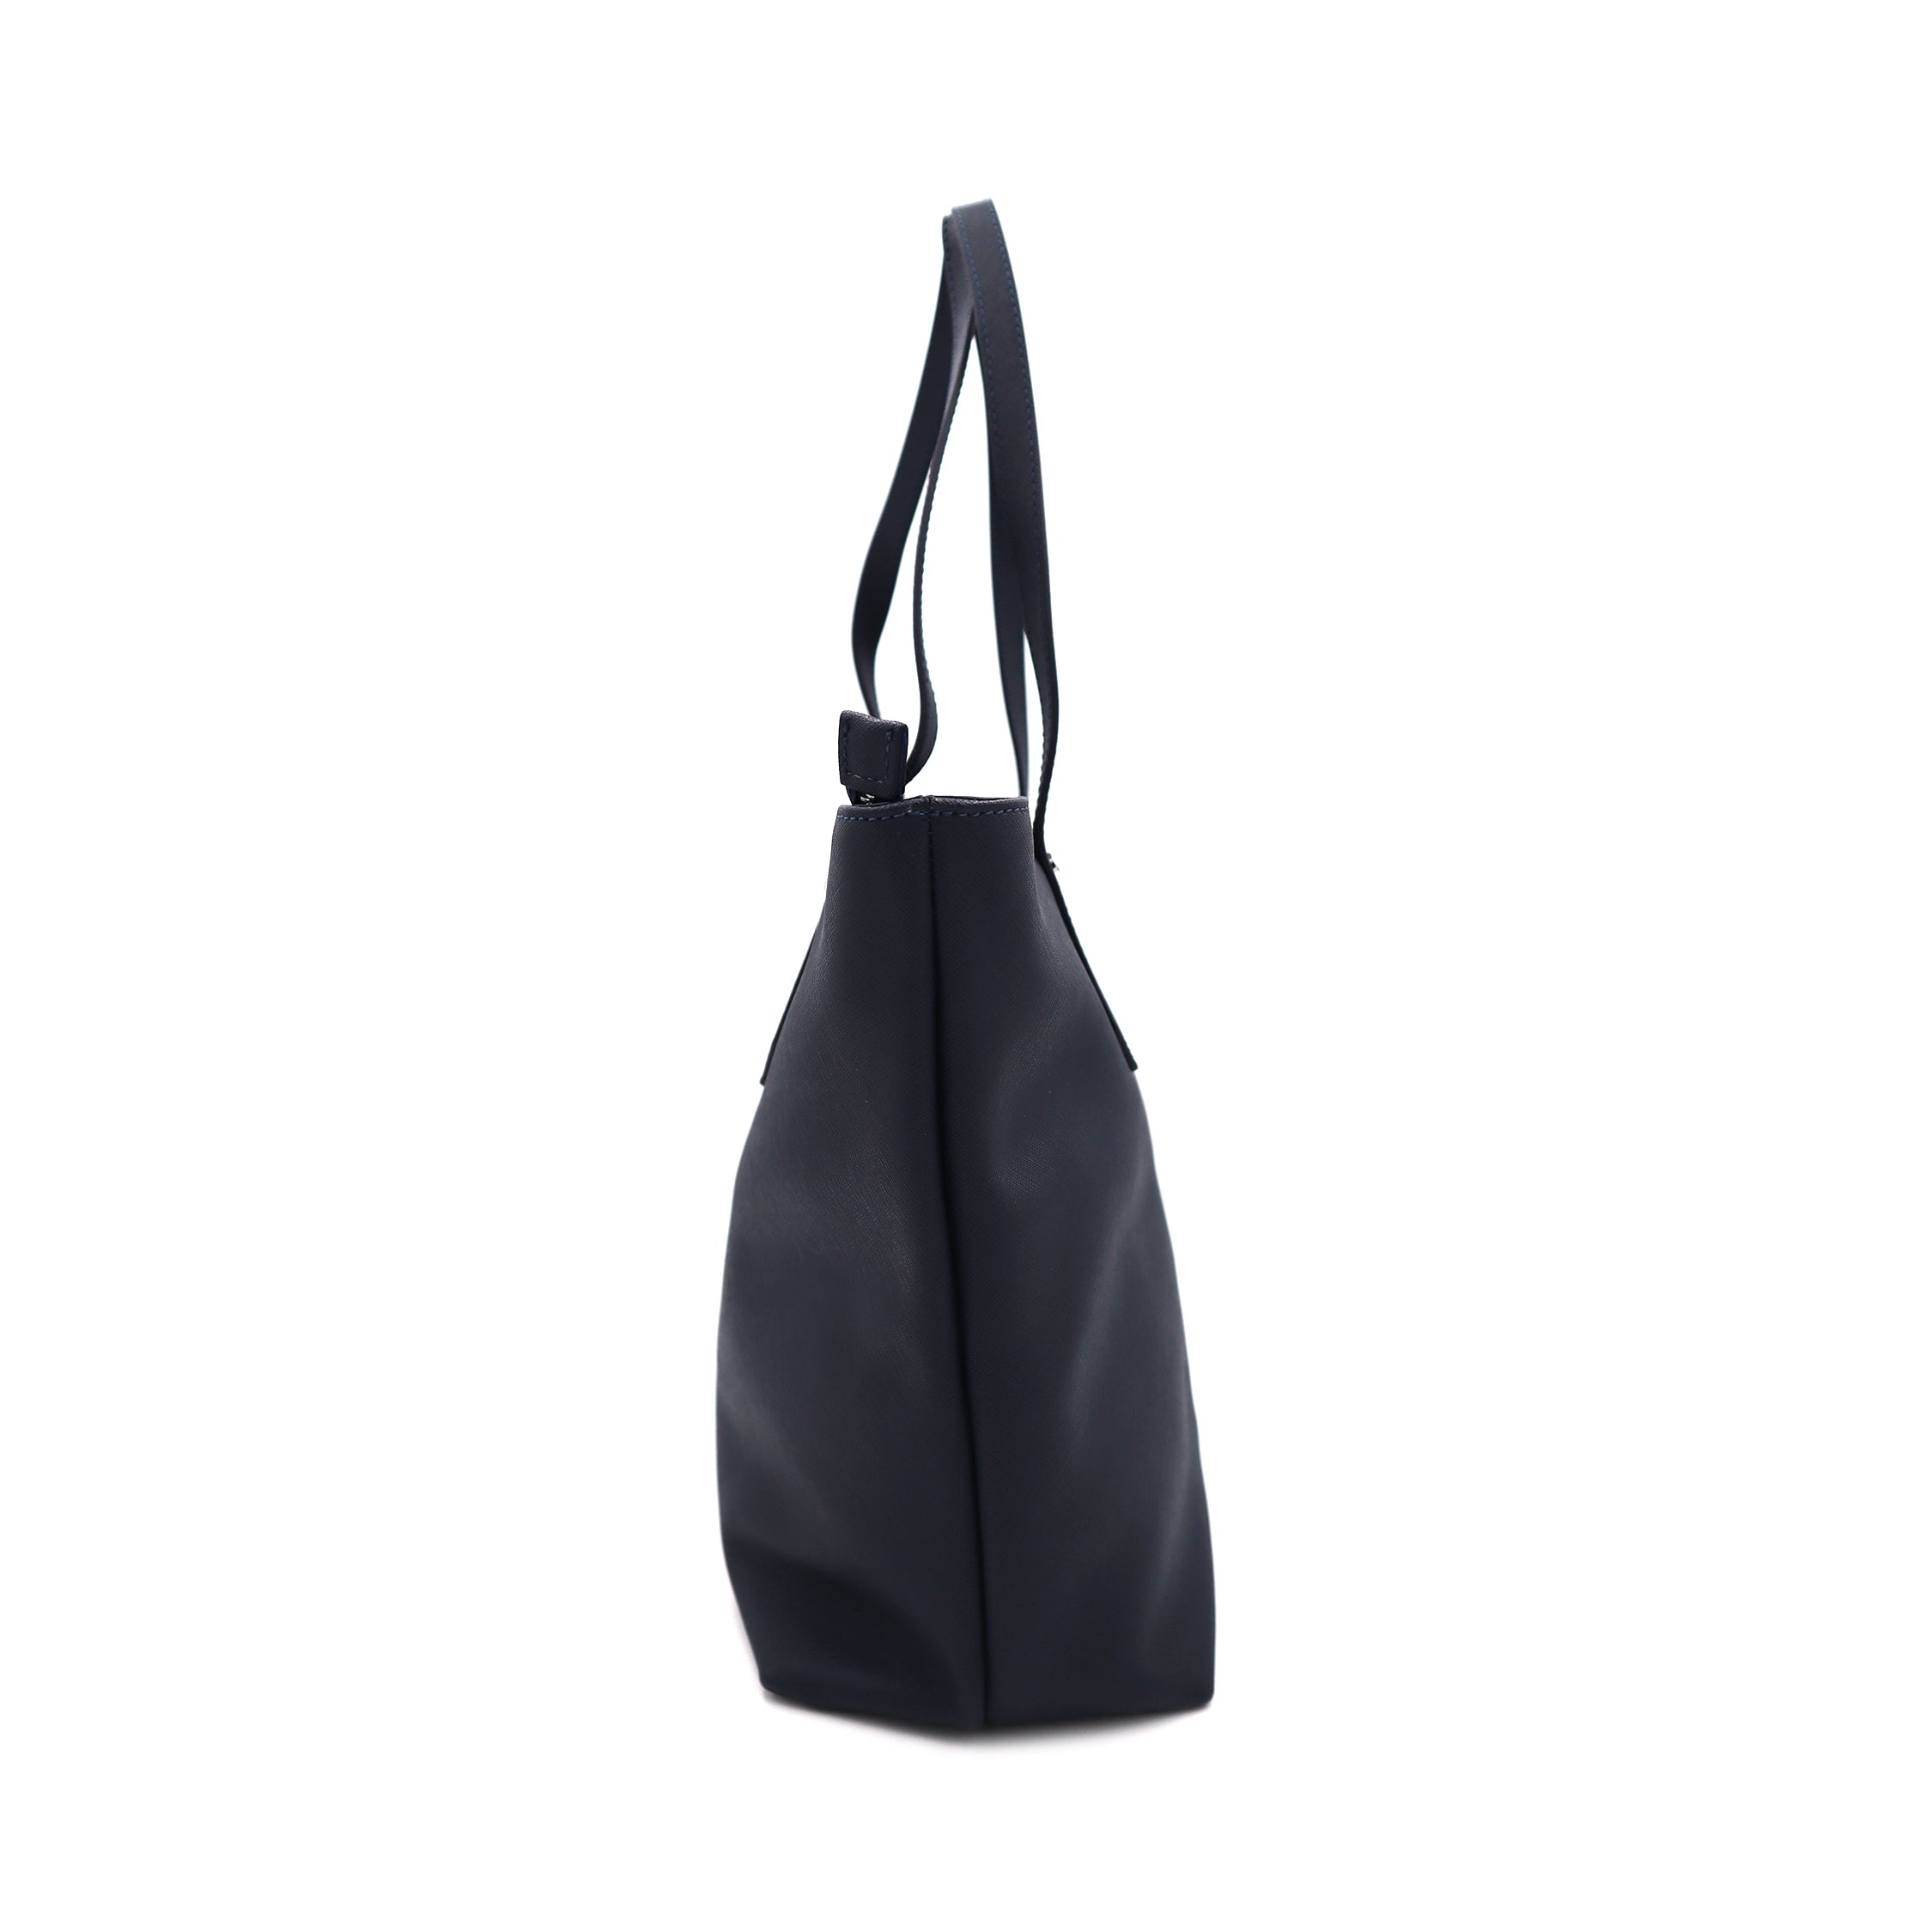 DEAL OF THE DAY Vivienne Westwood Classic Tote Bag Navy